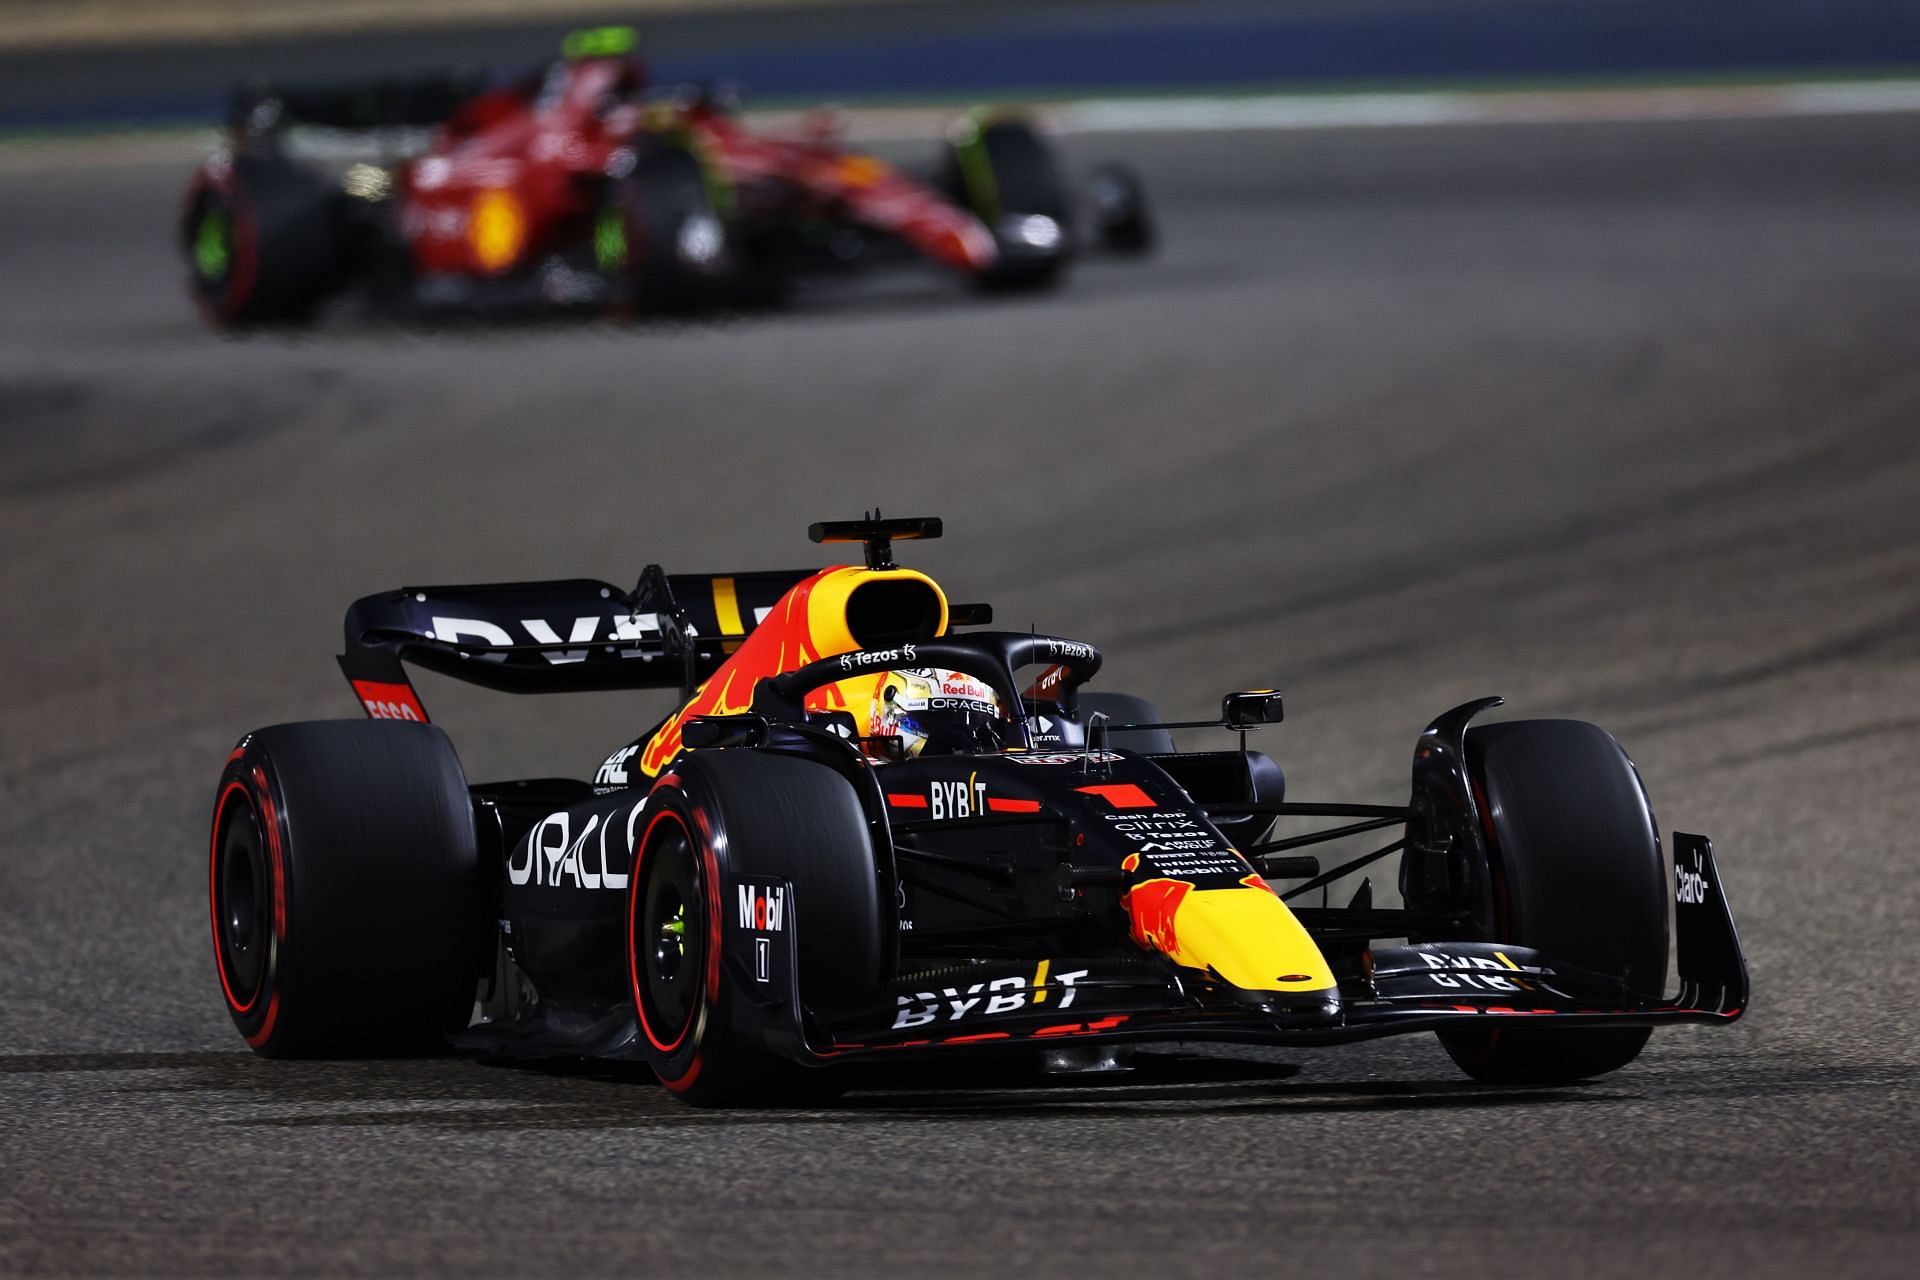 Max Verstappen (foreground) in action during the 2022 F1 Bahrain GP (Photo by Lars Baron/Getty Images)